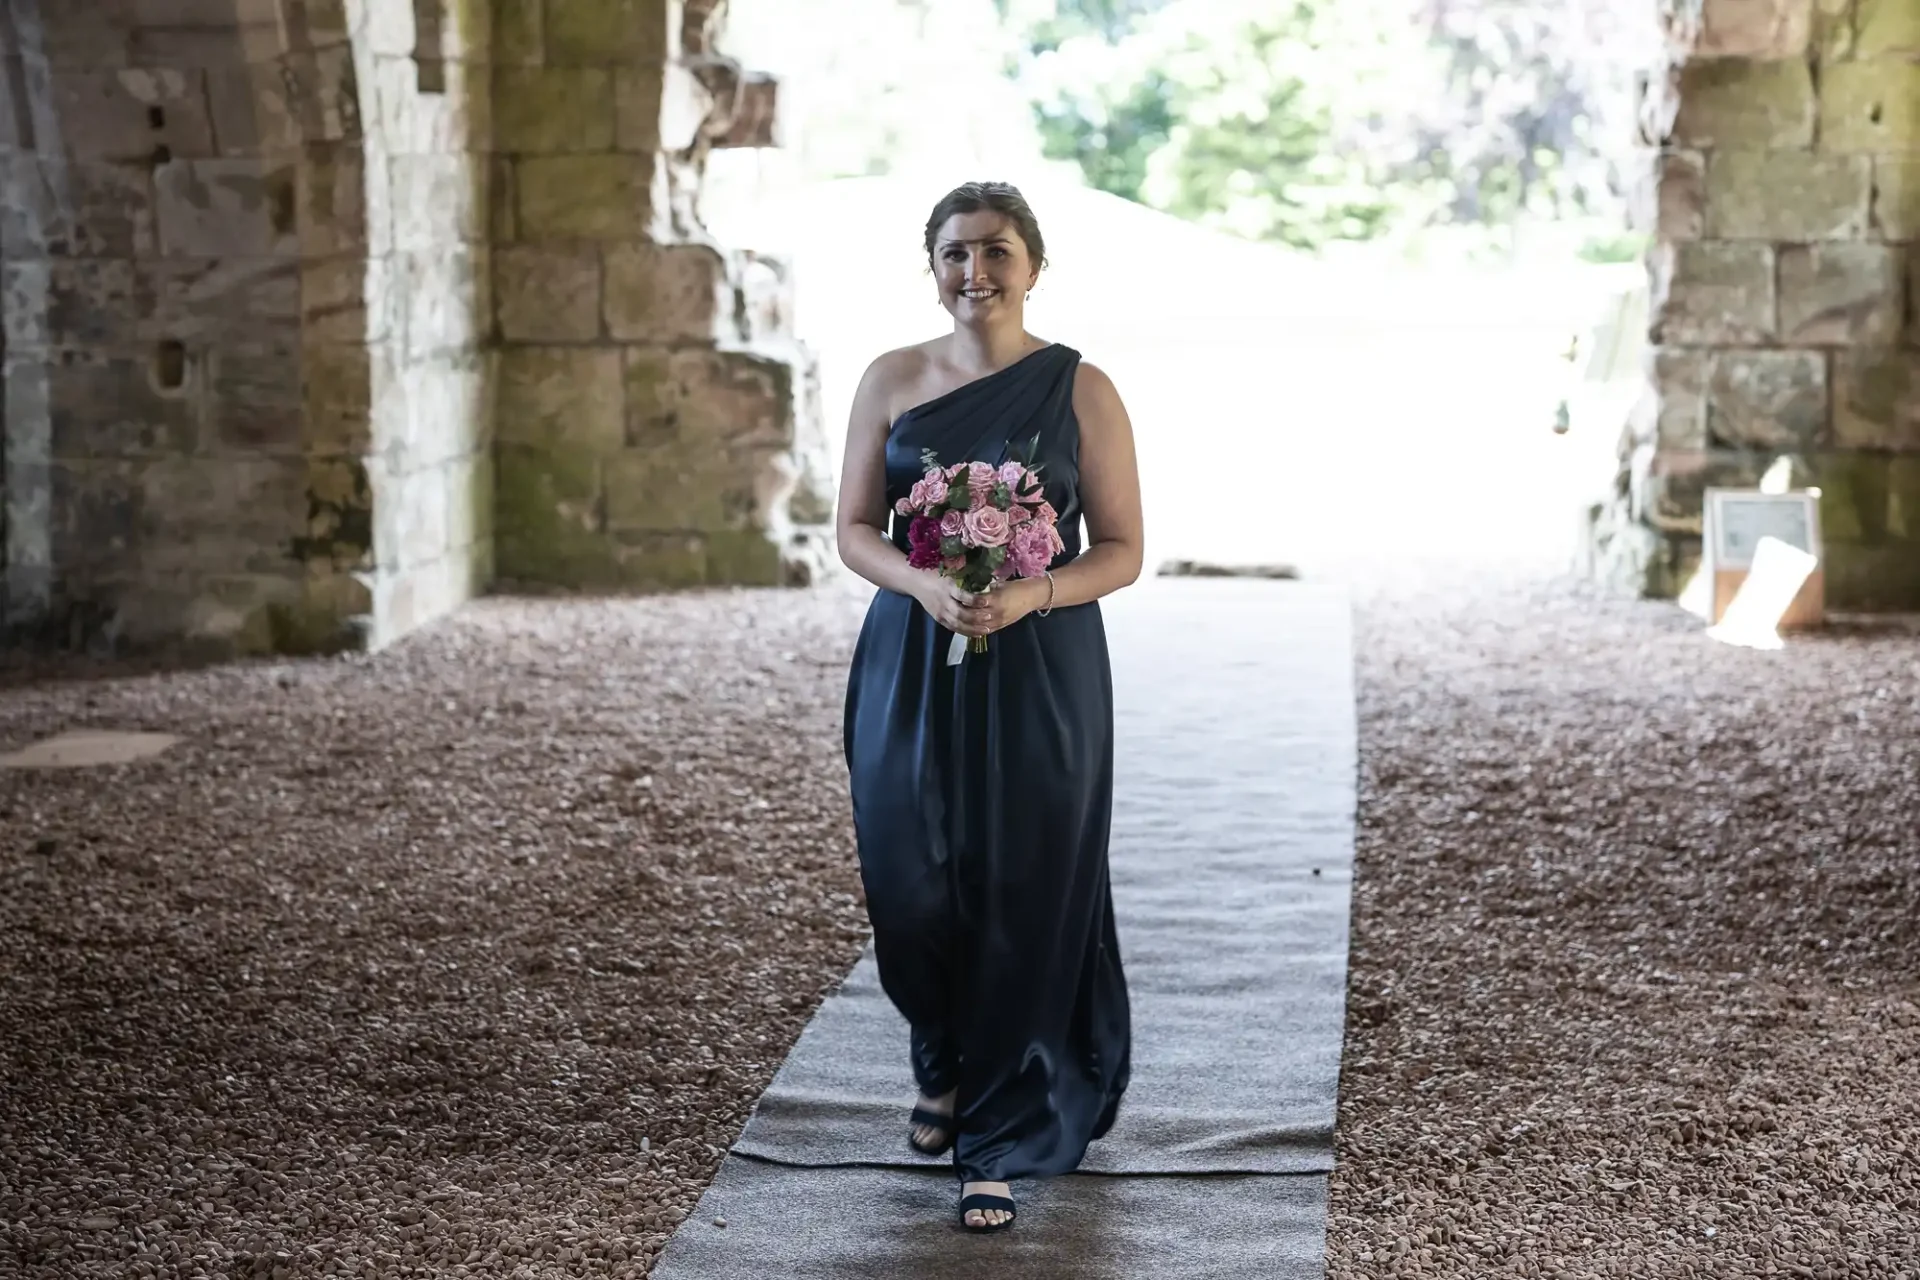 A woman in a navy blue gown holding a bouquet of pink flowers, smiling as she stands on a covered stone pathway.